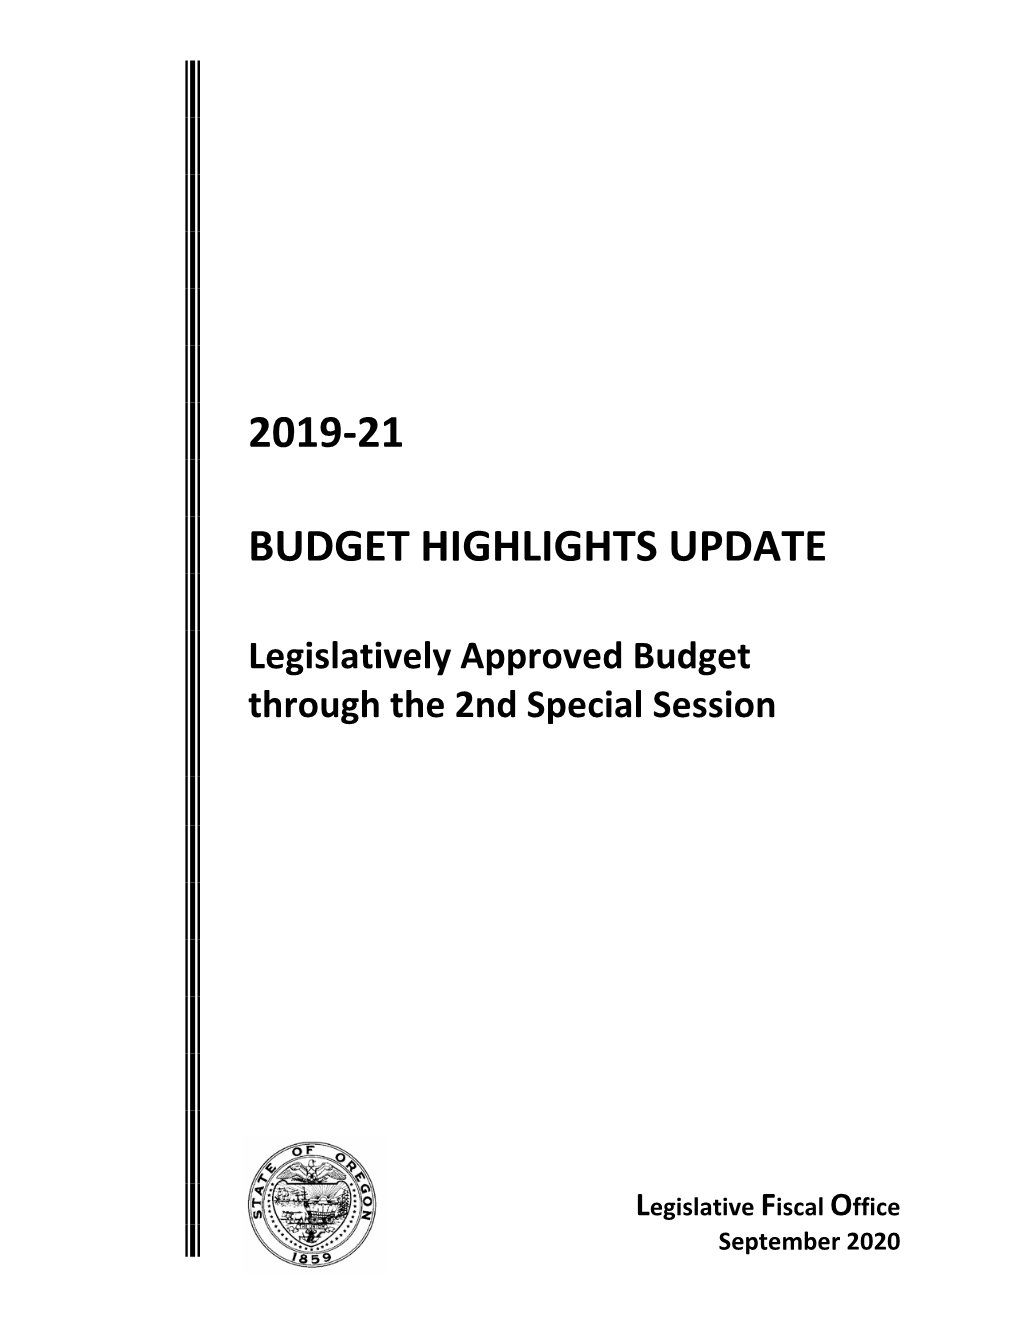 2019-21 Budget Highlights Update Through the 2Nd Special Session